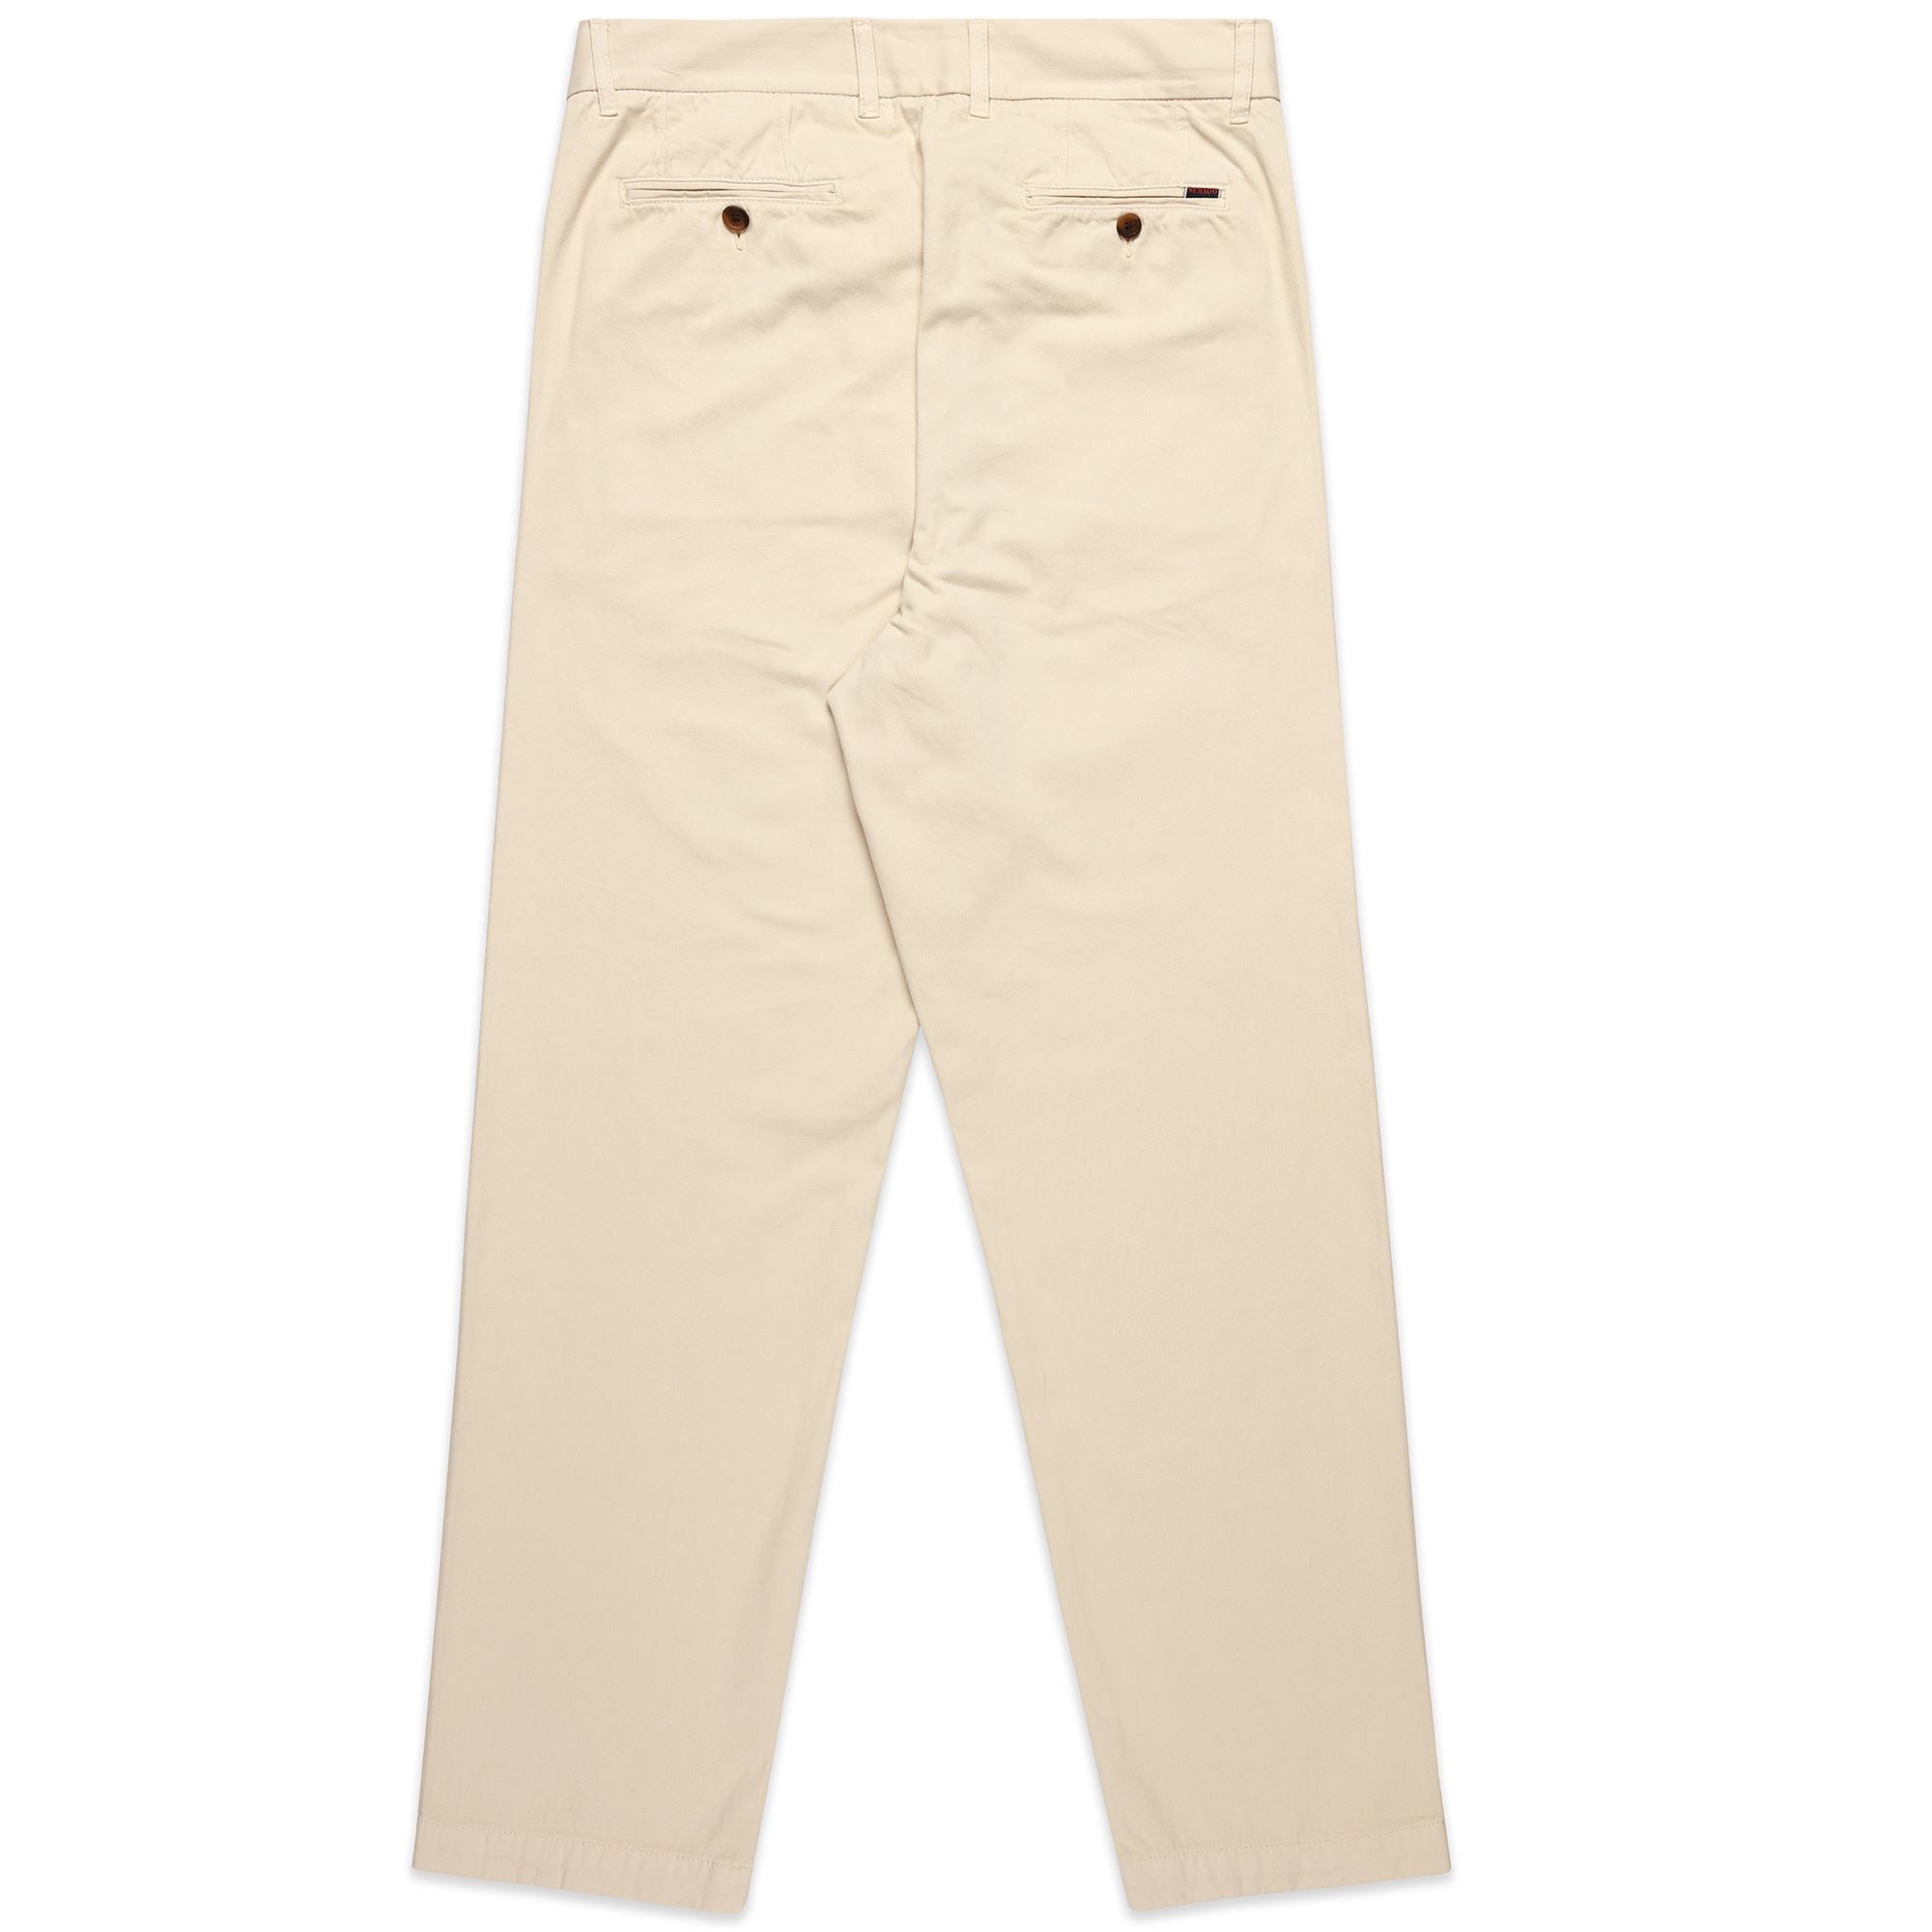 NEWRY - Pants - CHINO - Man - BEIGE GESSO